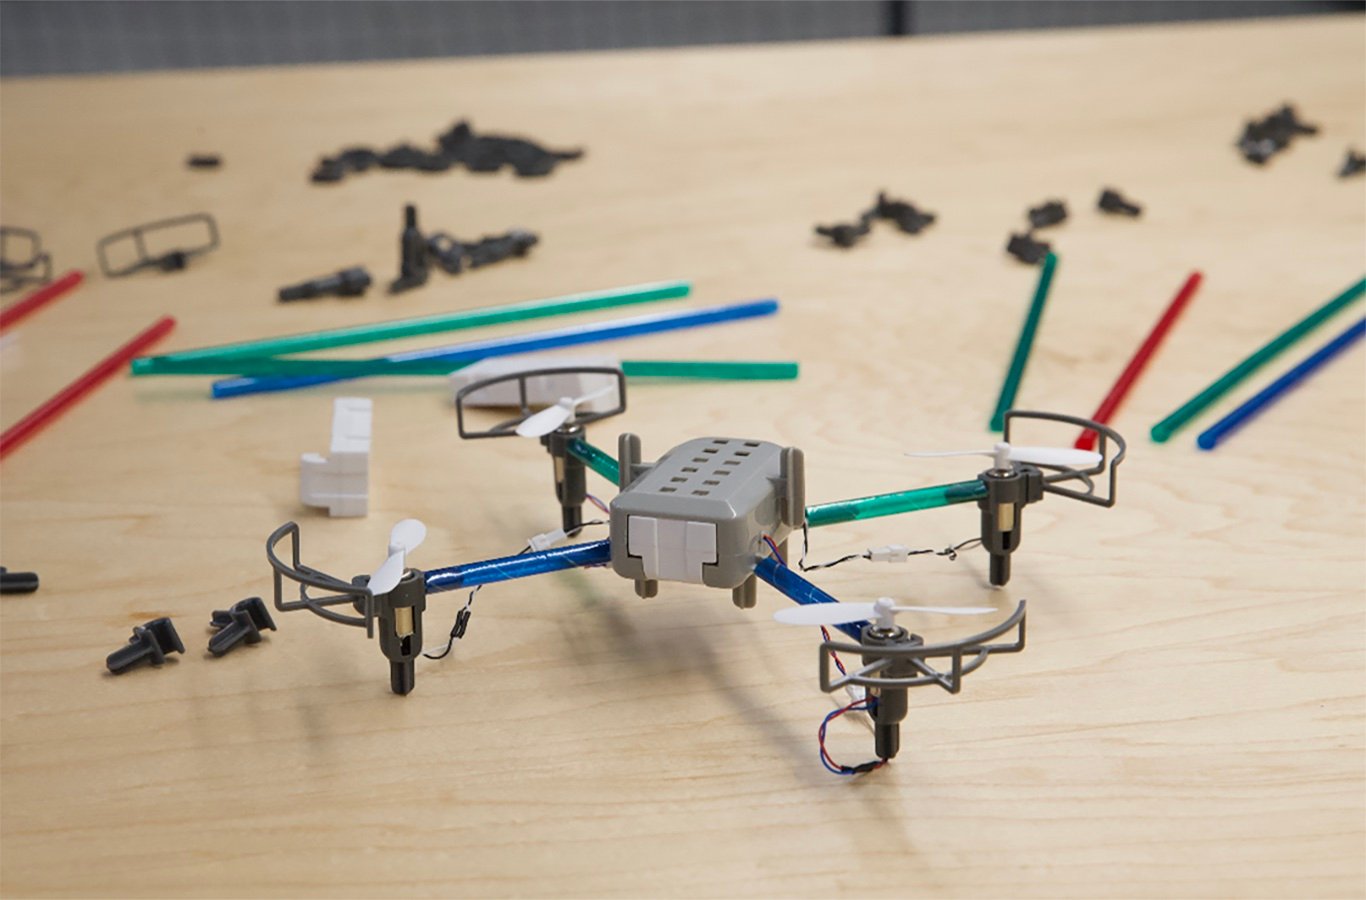 An assembled drone from the Drone Maker Kit sitting on a table.